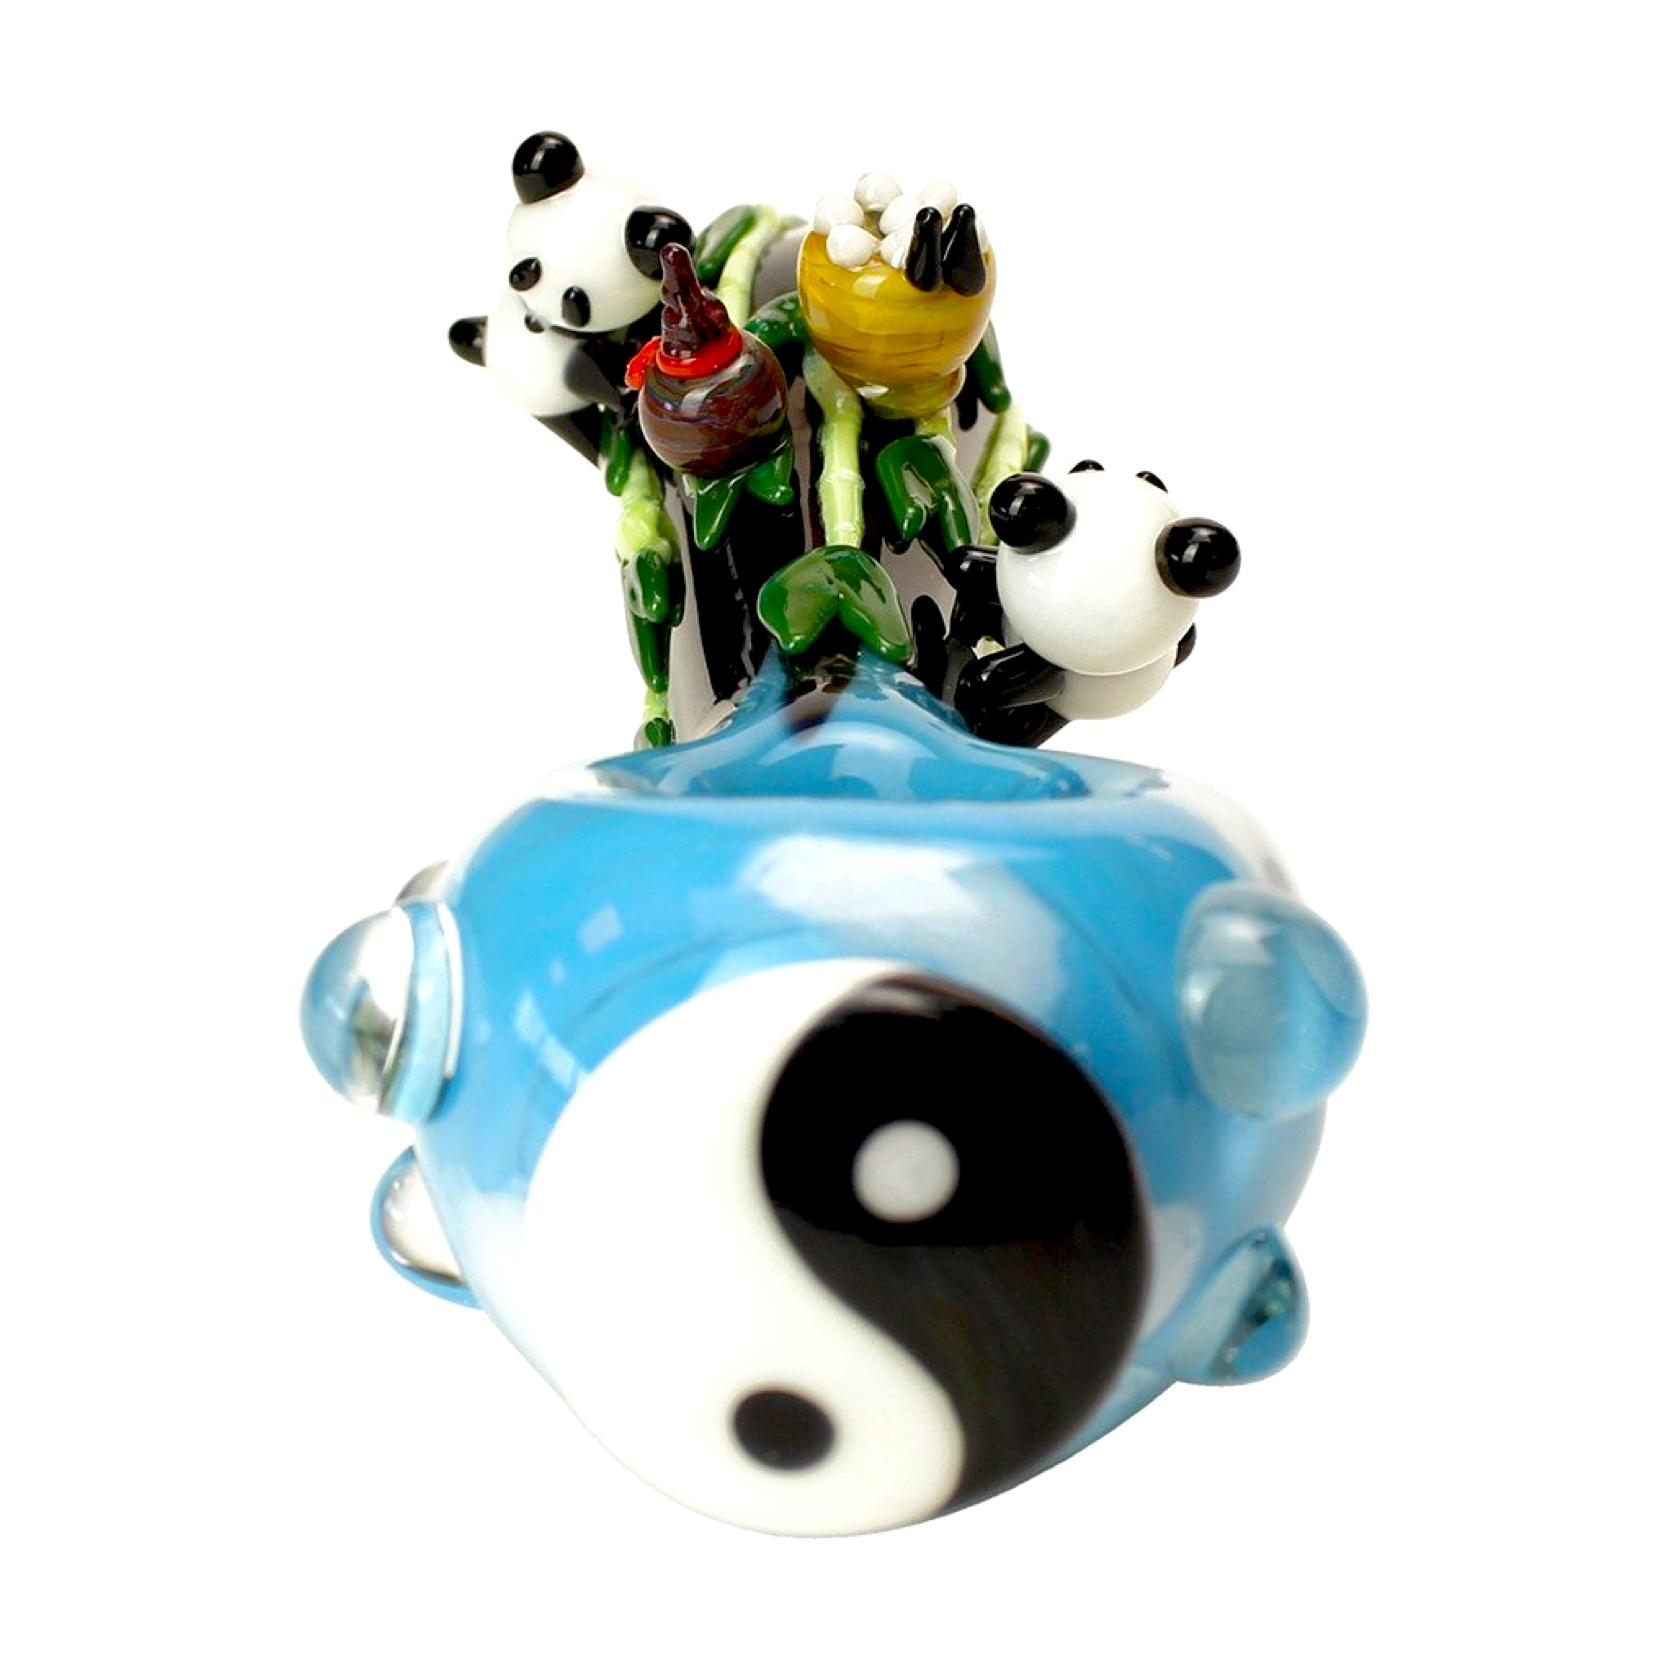 Empire Glassworks "Hungry Panda" Hand Pipe 🐼 